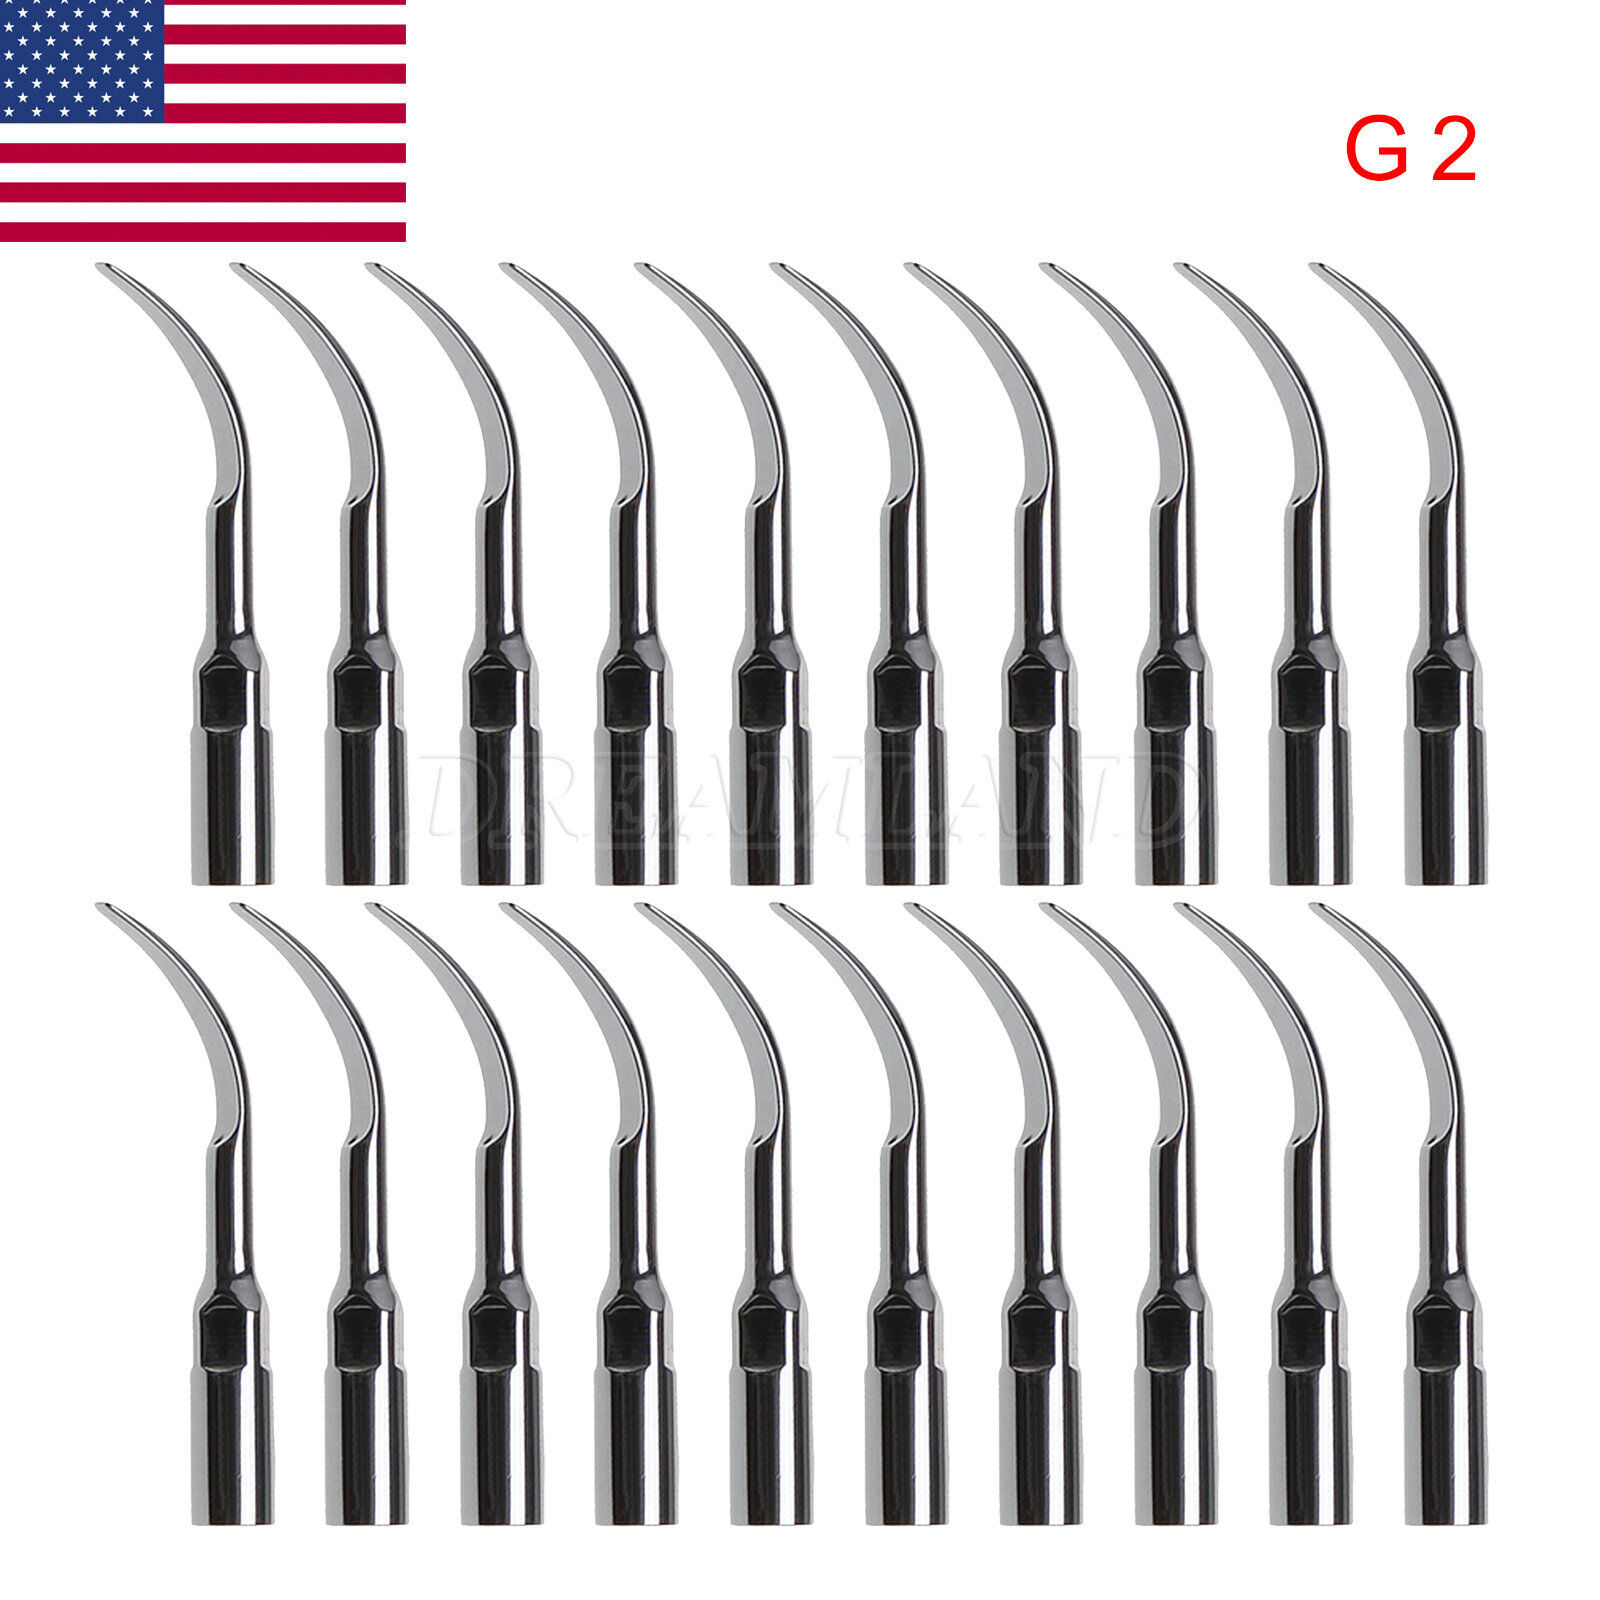 20X Dental Ultrasonic Scaler Scaling Tips L5US Recommendation Fit G2 EMS Ranking TOP19 Handpiece Cavitron